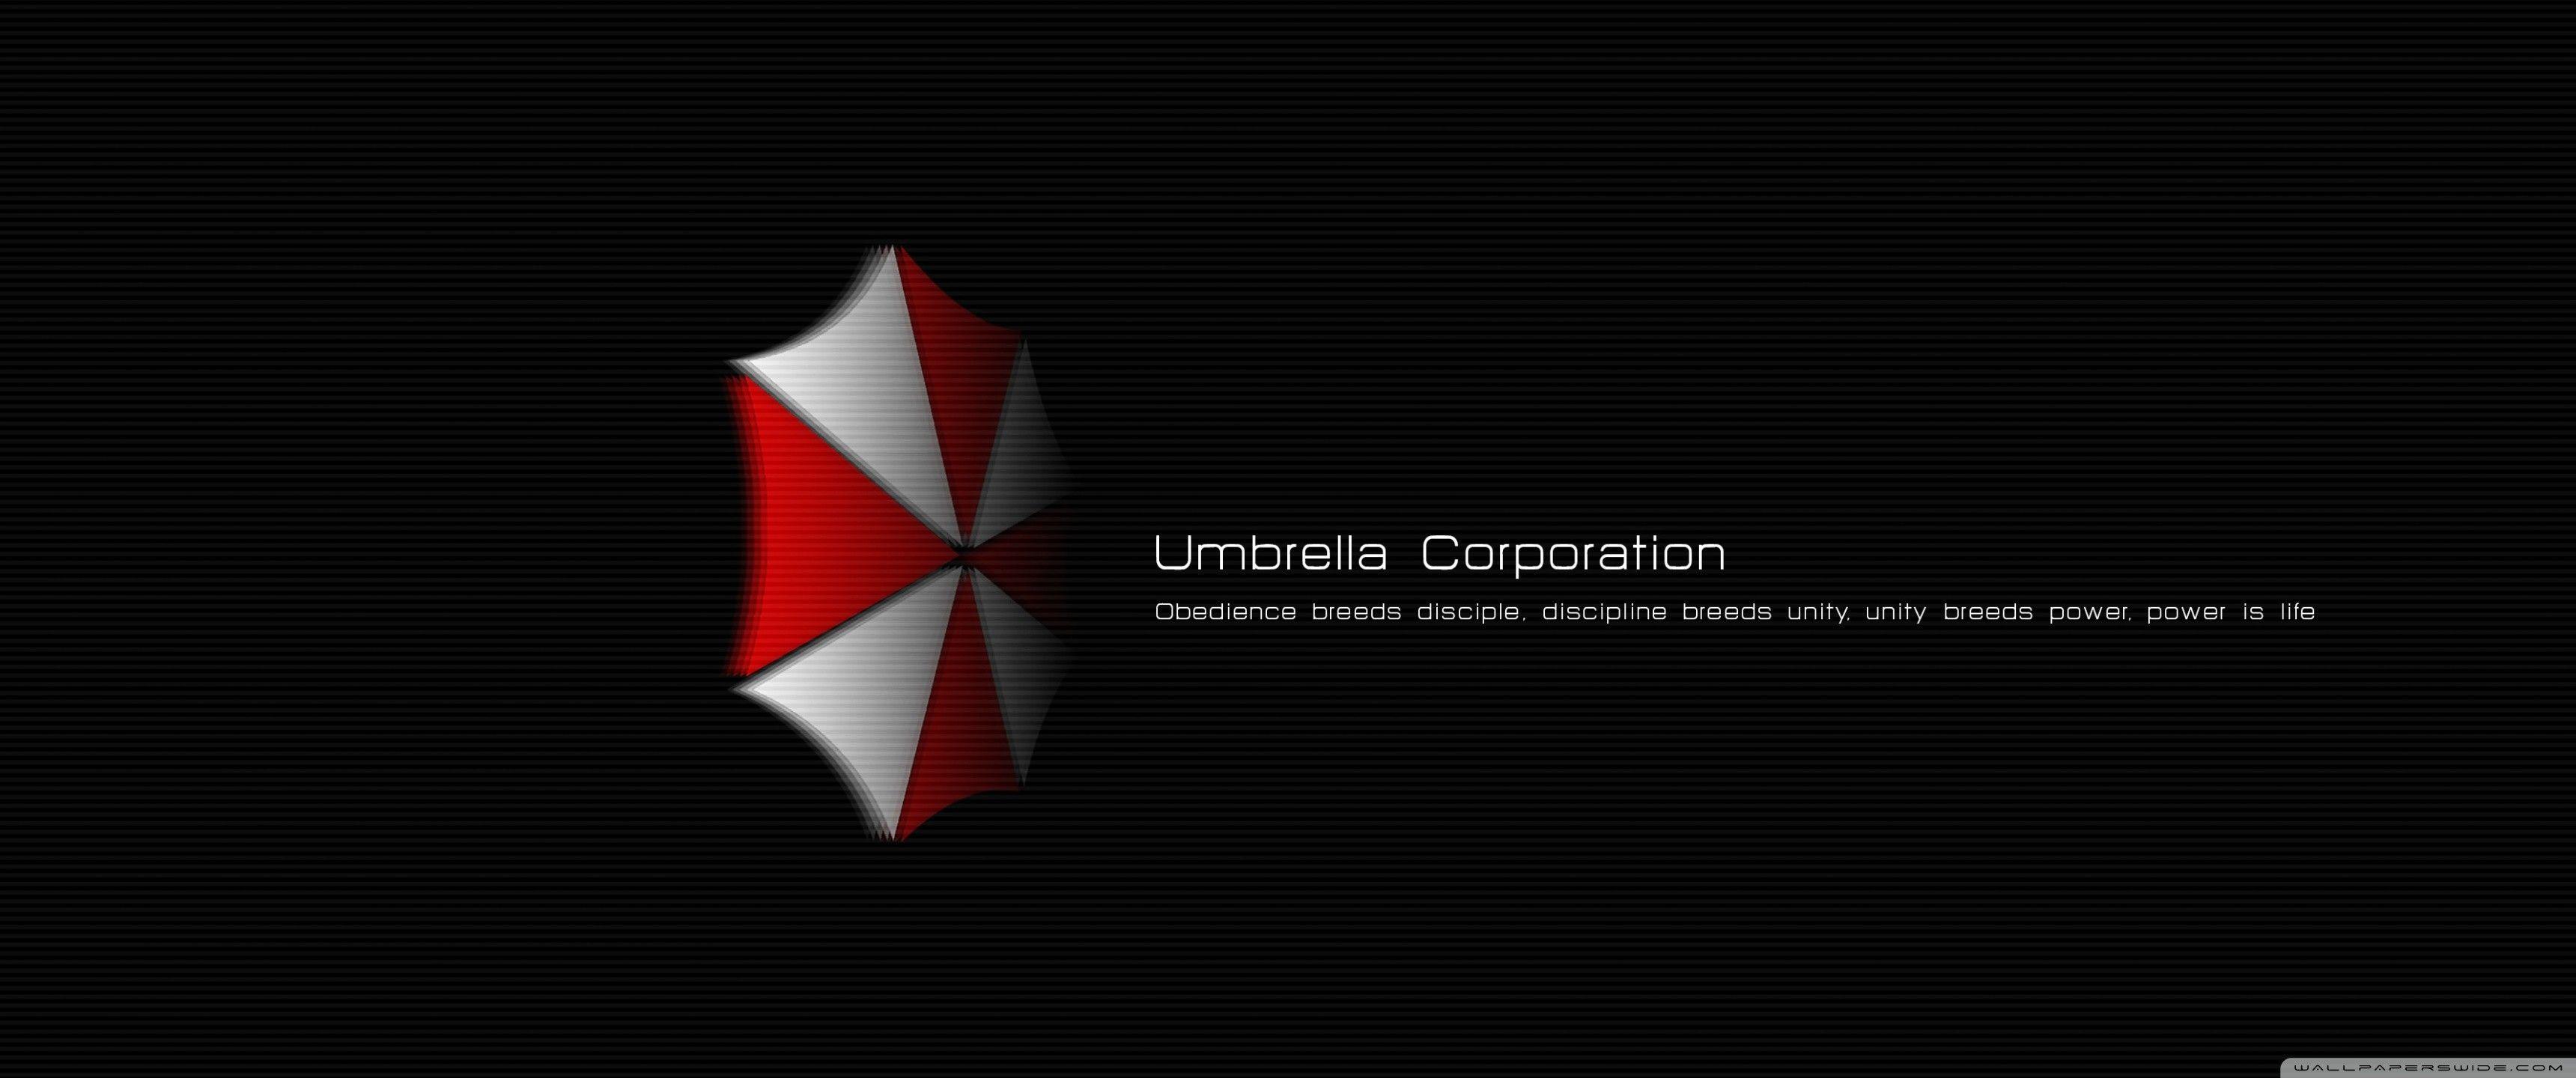 Any better 3440x1440 Umbrella logo wallpaper than this? The fact